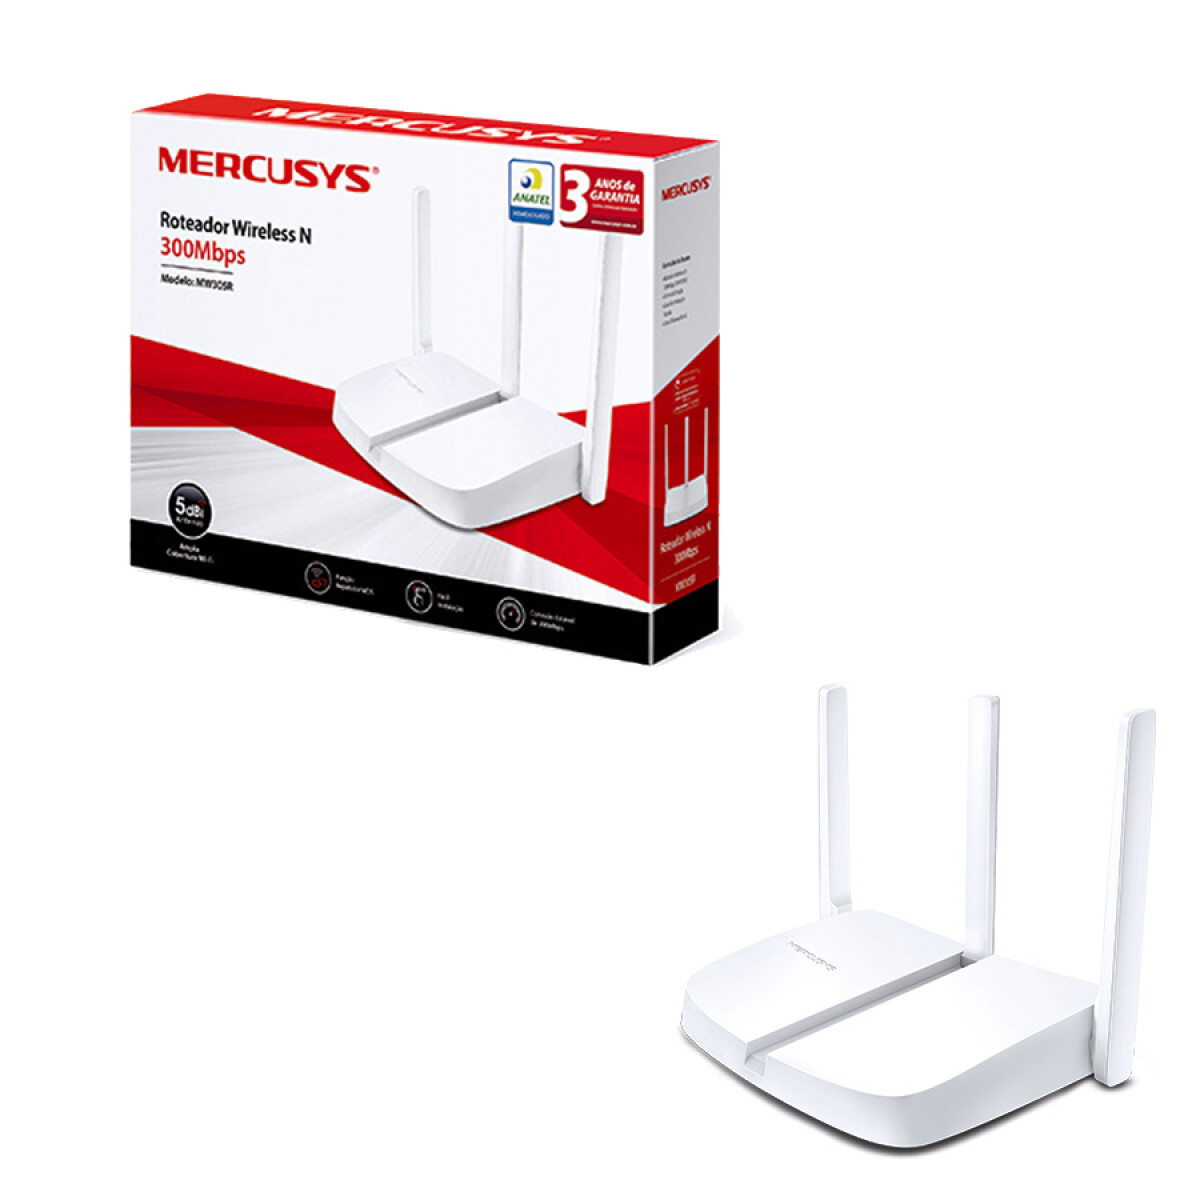 Router Wireless Mercusys MW305R 300 Mbps - 001 